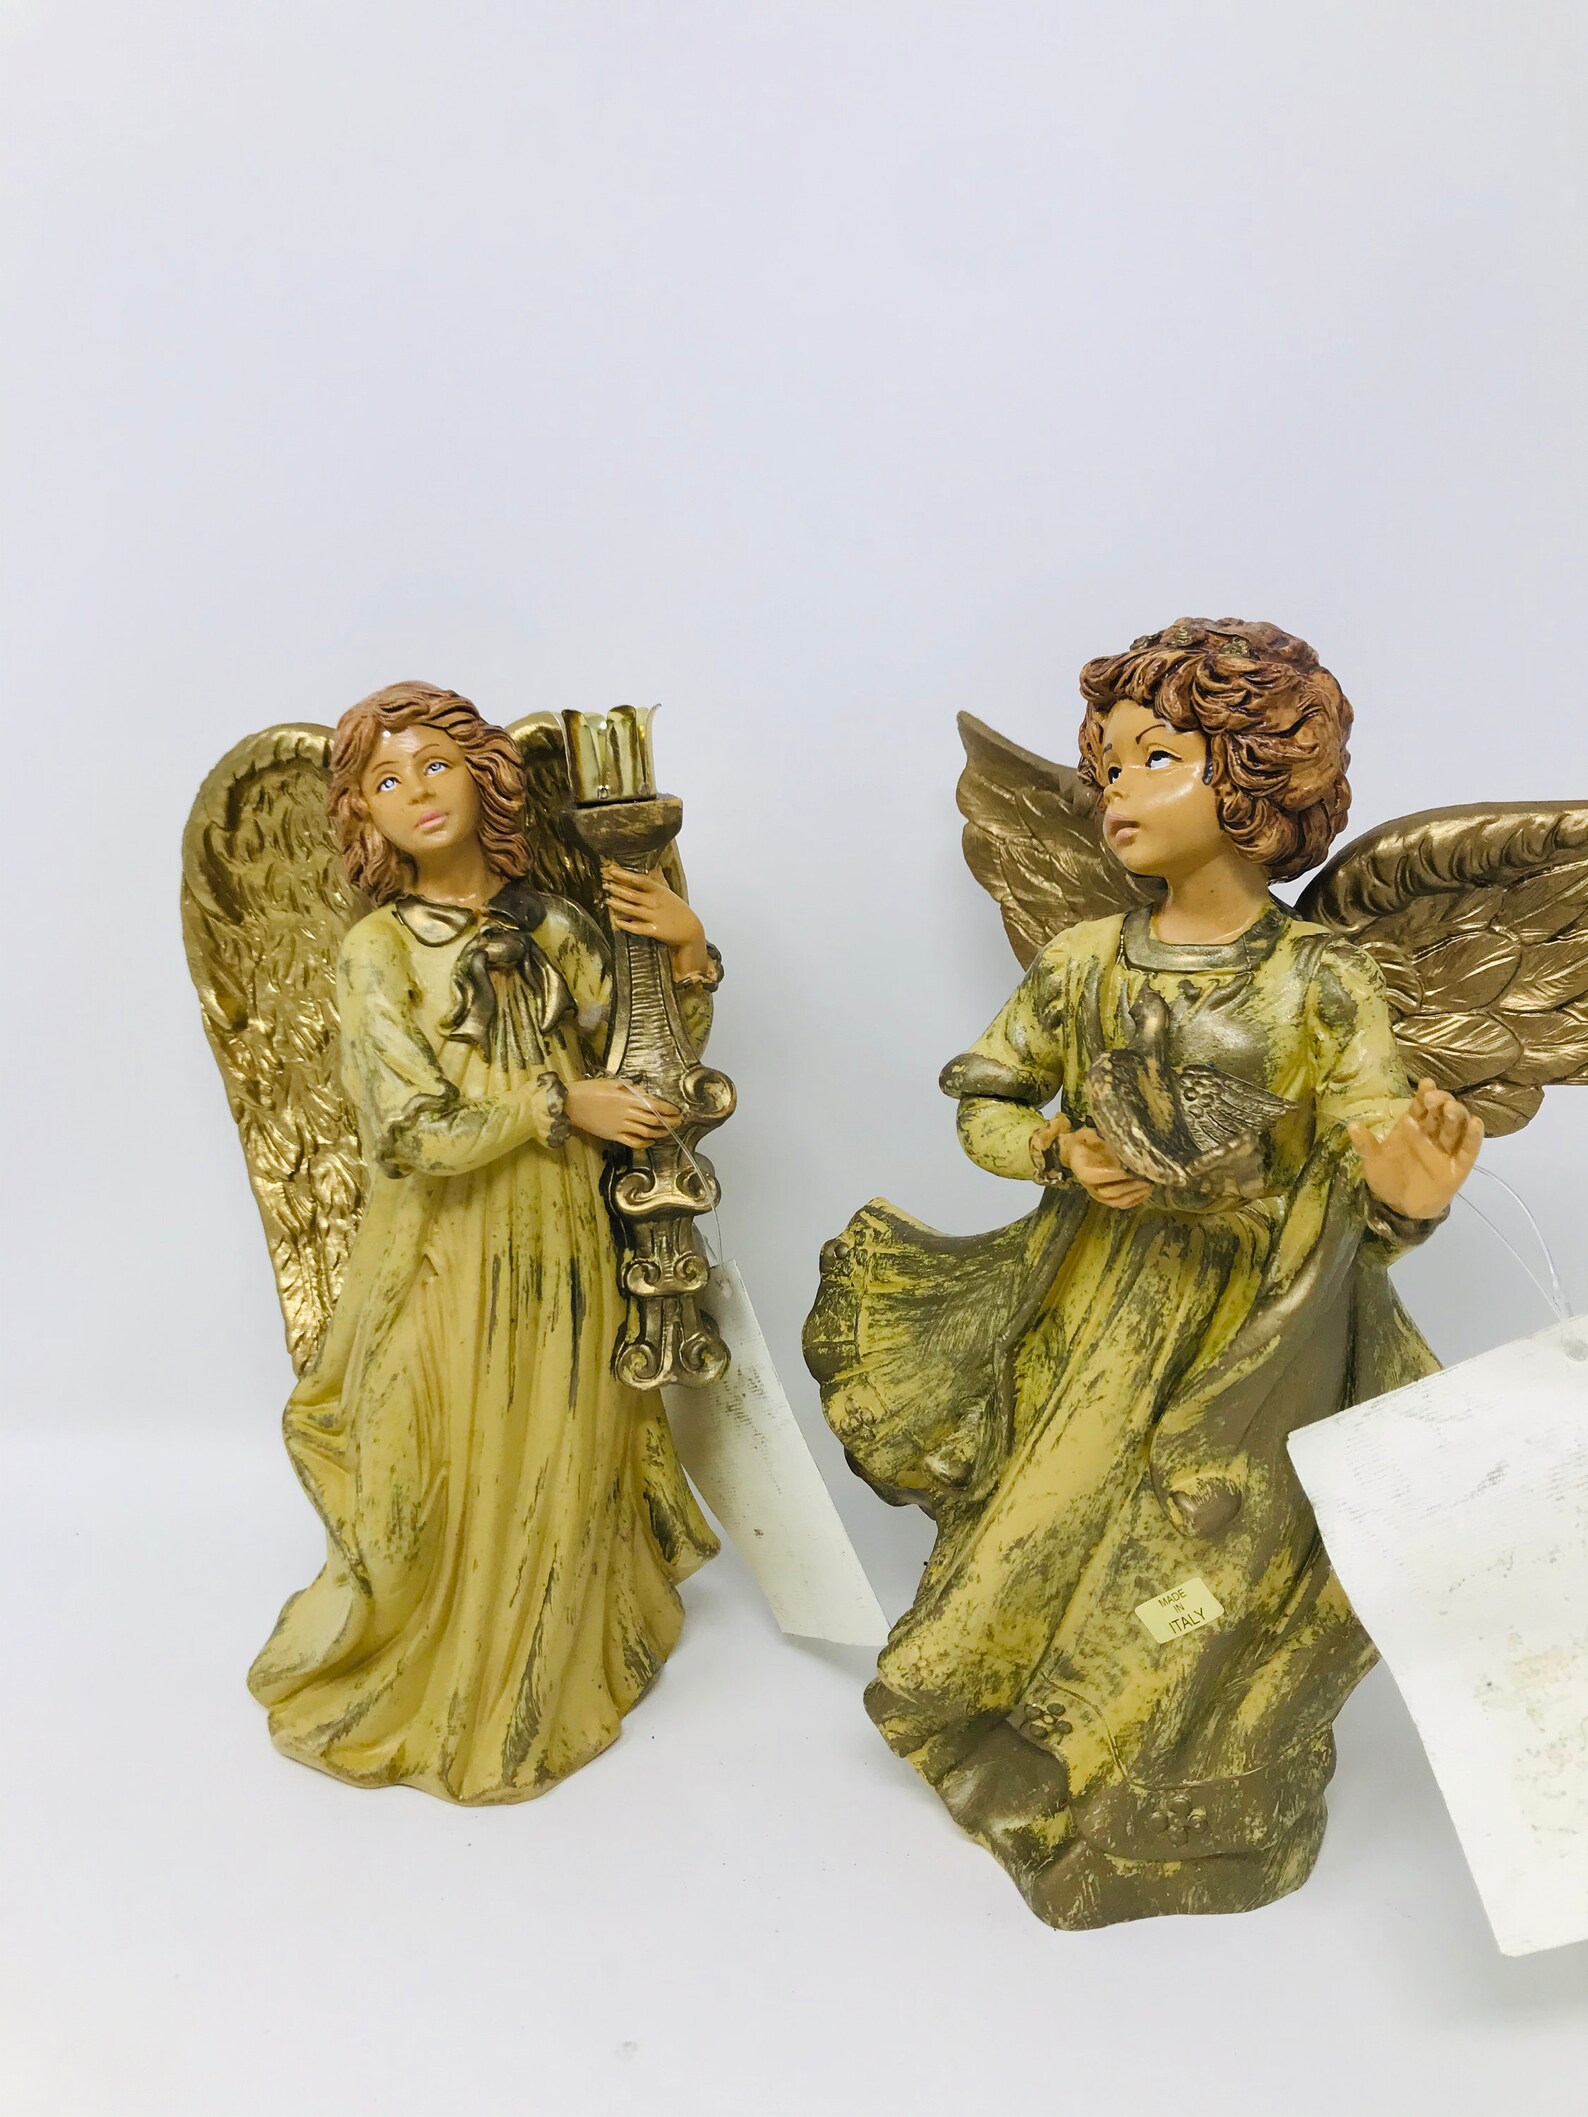 Vintage EUROMARCHI Hand Made Italy Angels Set Nativity | Etsy